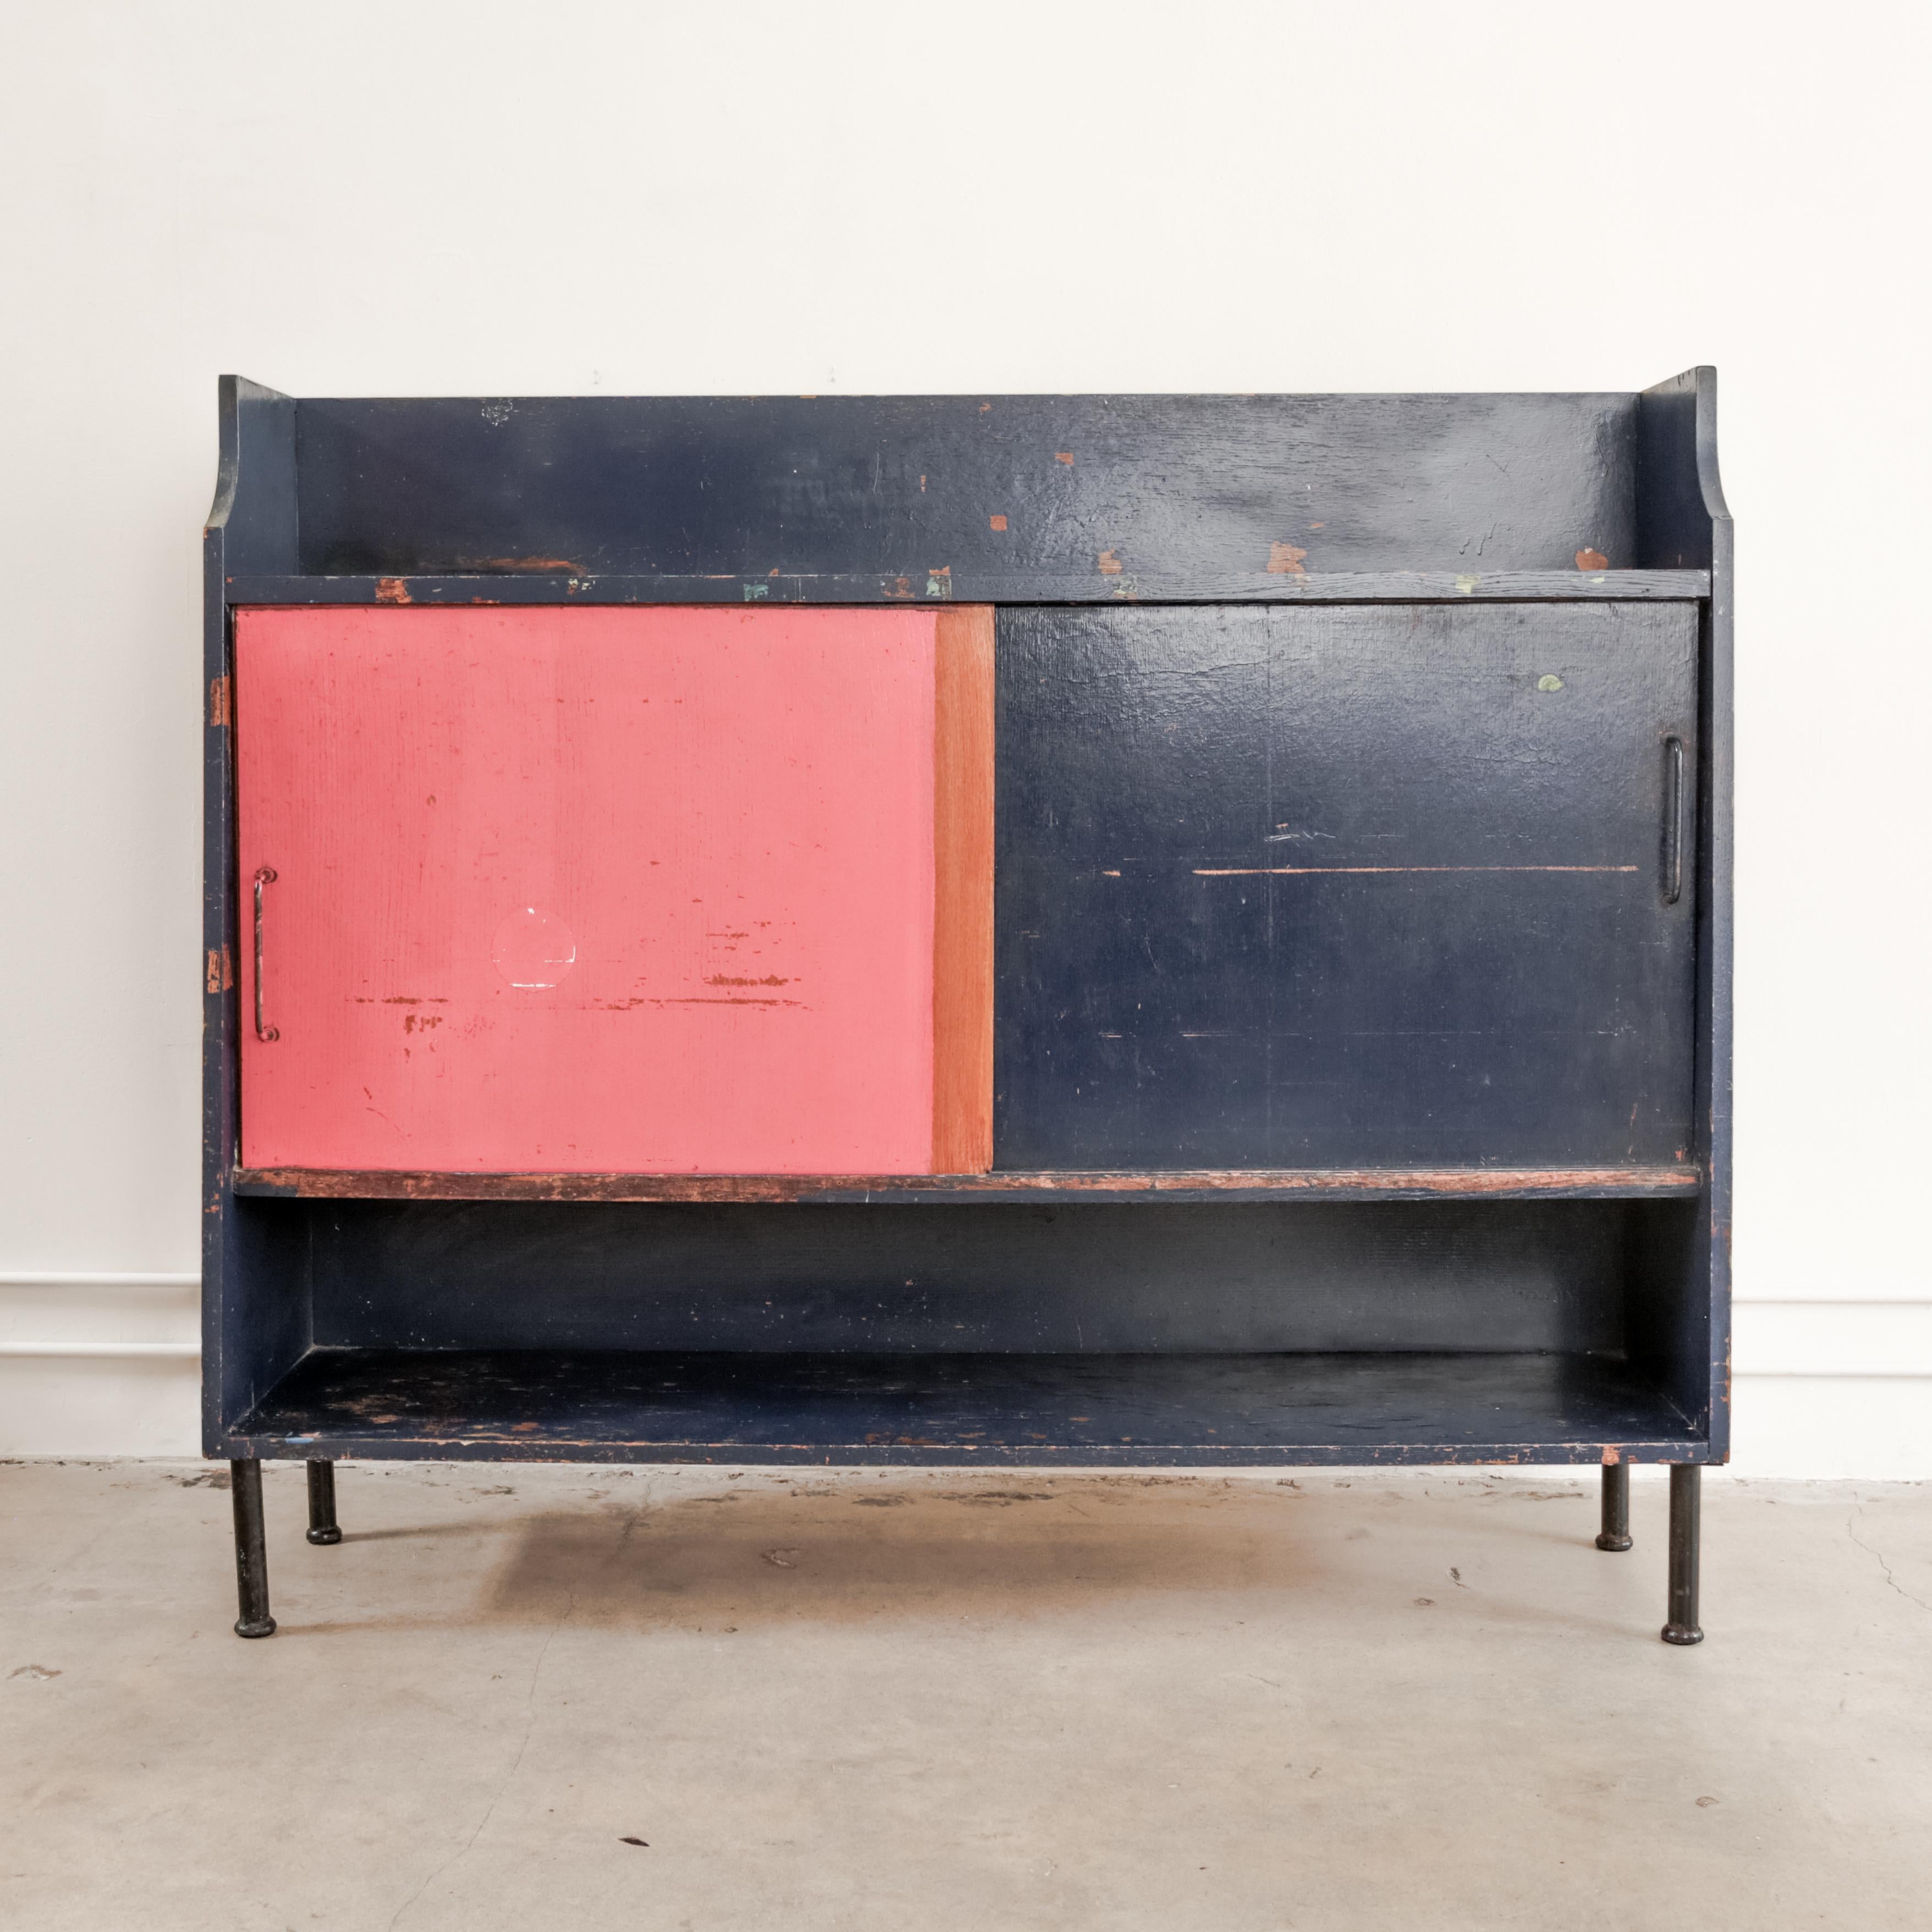 In the style of Jean Prouve a patinated Prussian blue and pink student storage cupboard with sliding bypass doors, from the dormitories of the La Residence Universitaire Jean Zay, France circa 1950's.